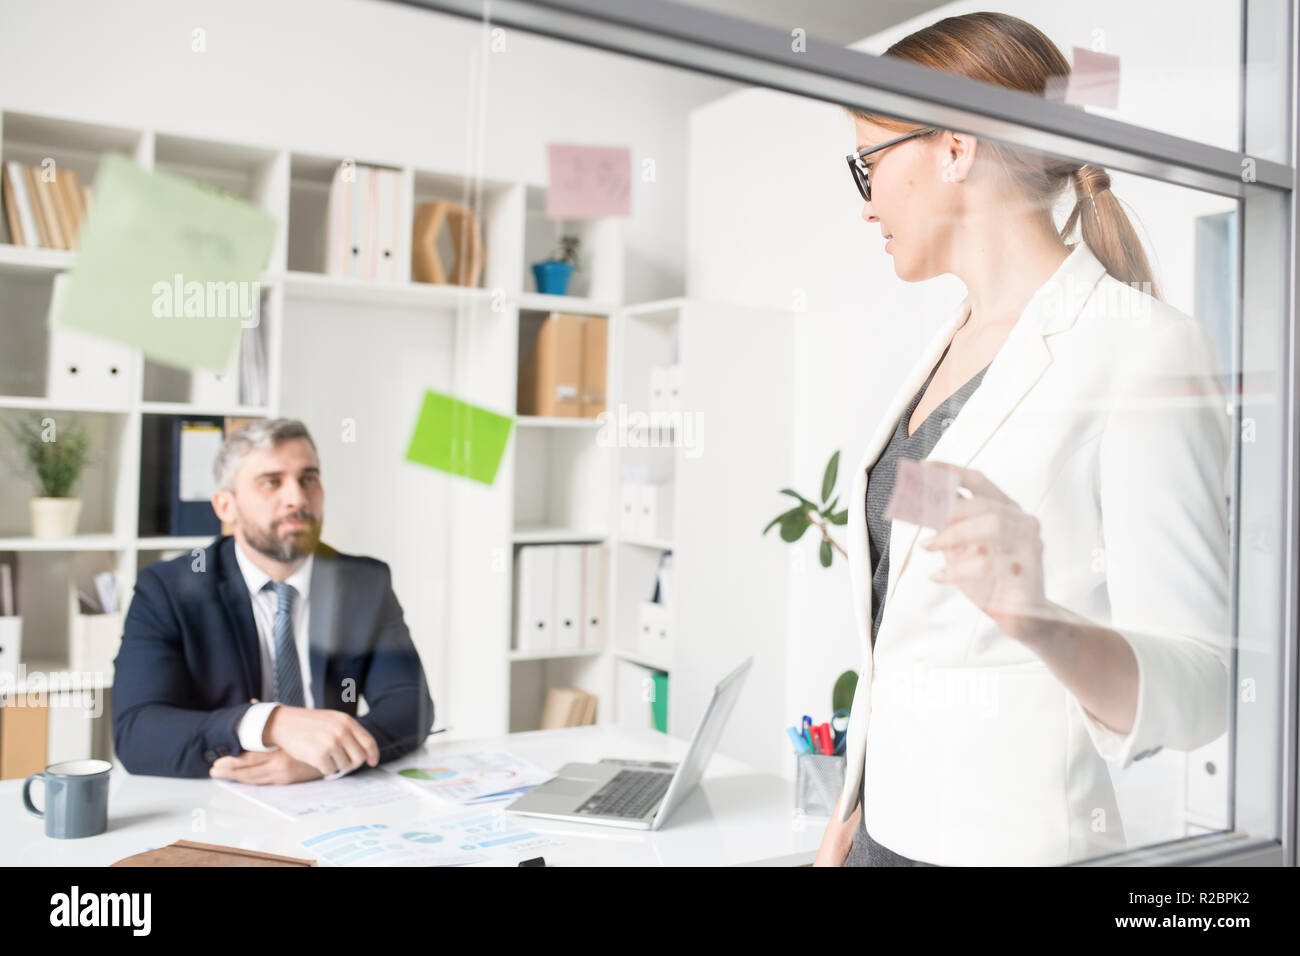 Business lady presenting idea to creative director Stock Photo